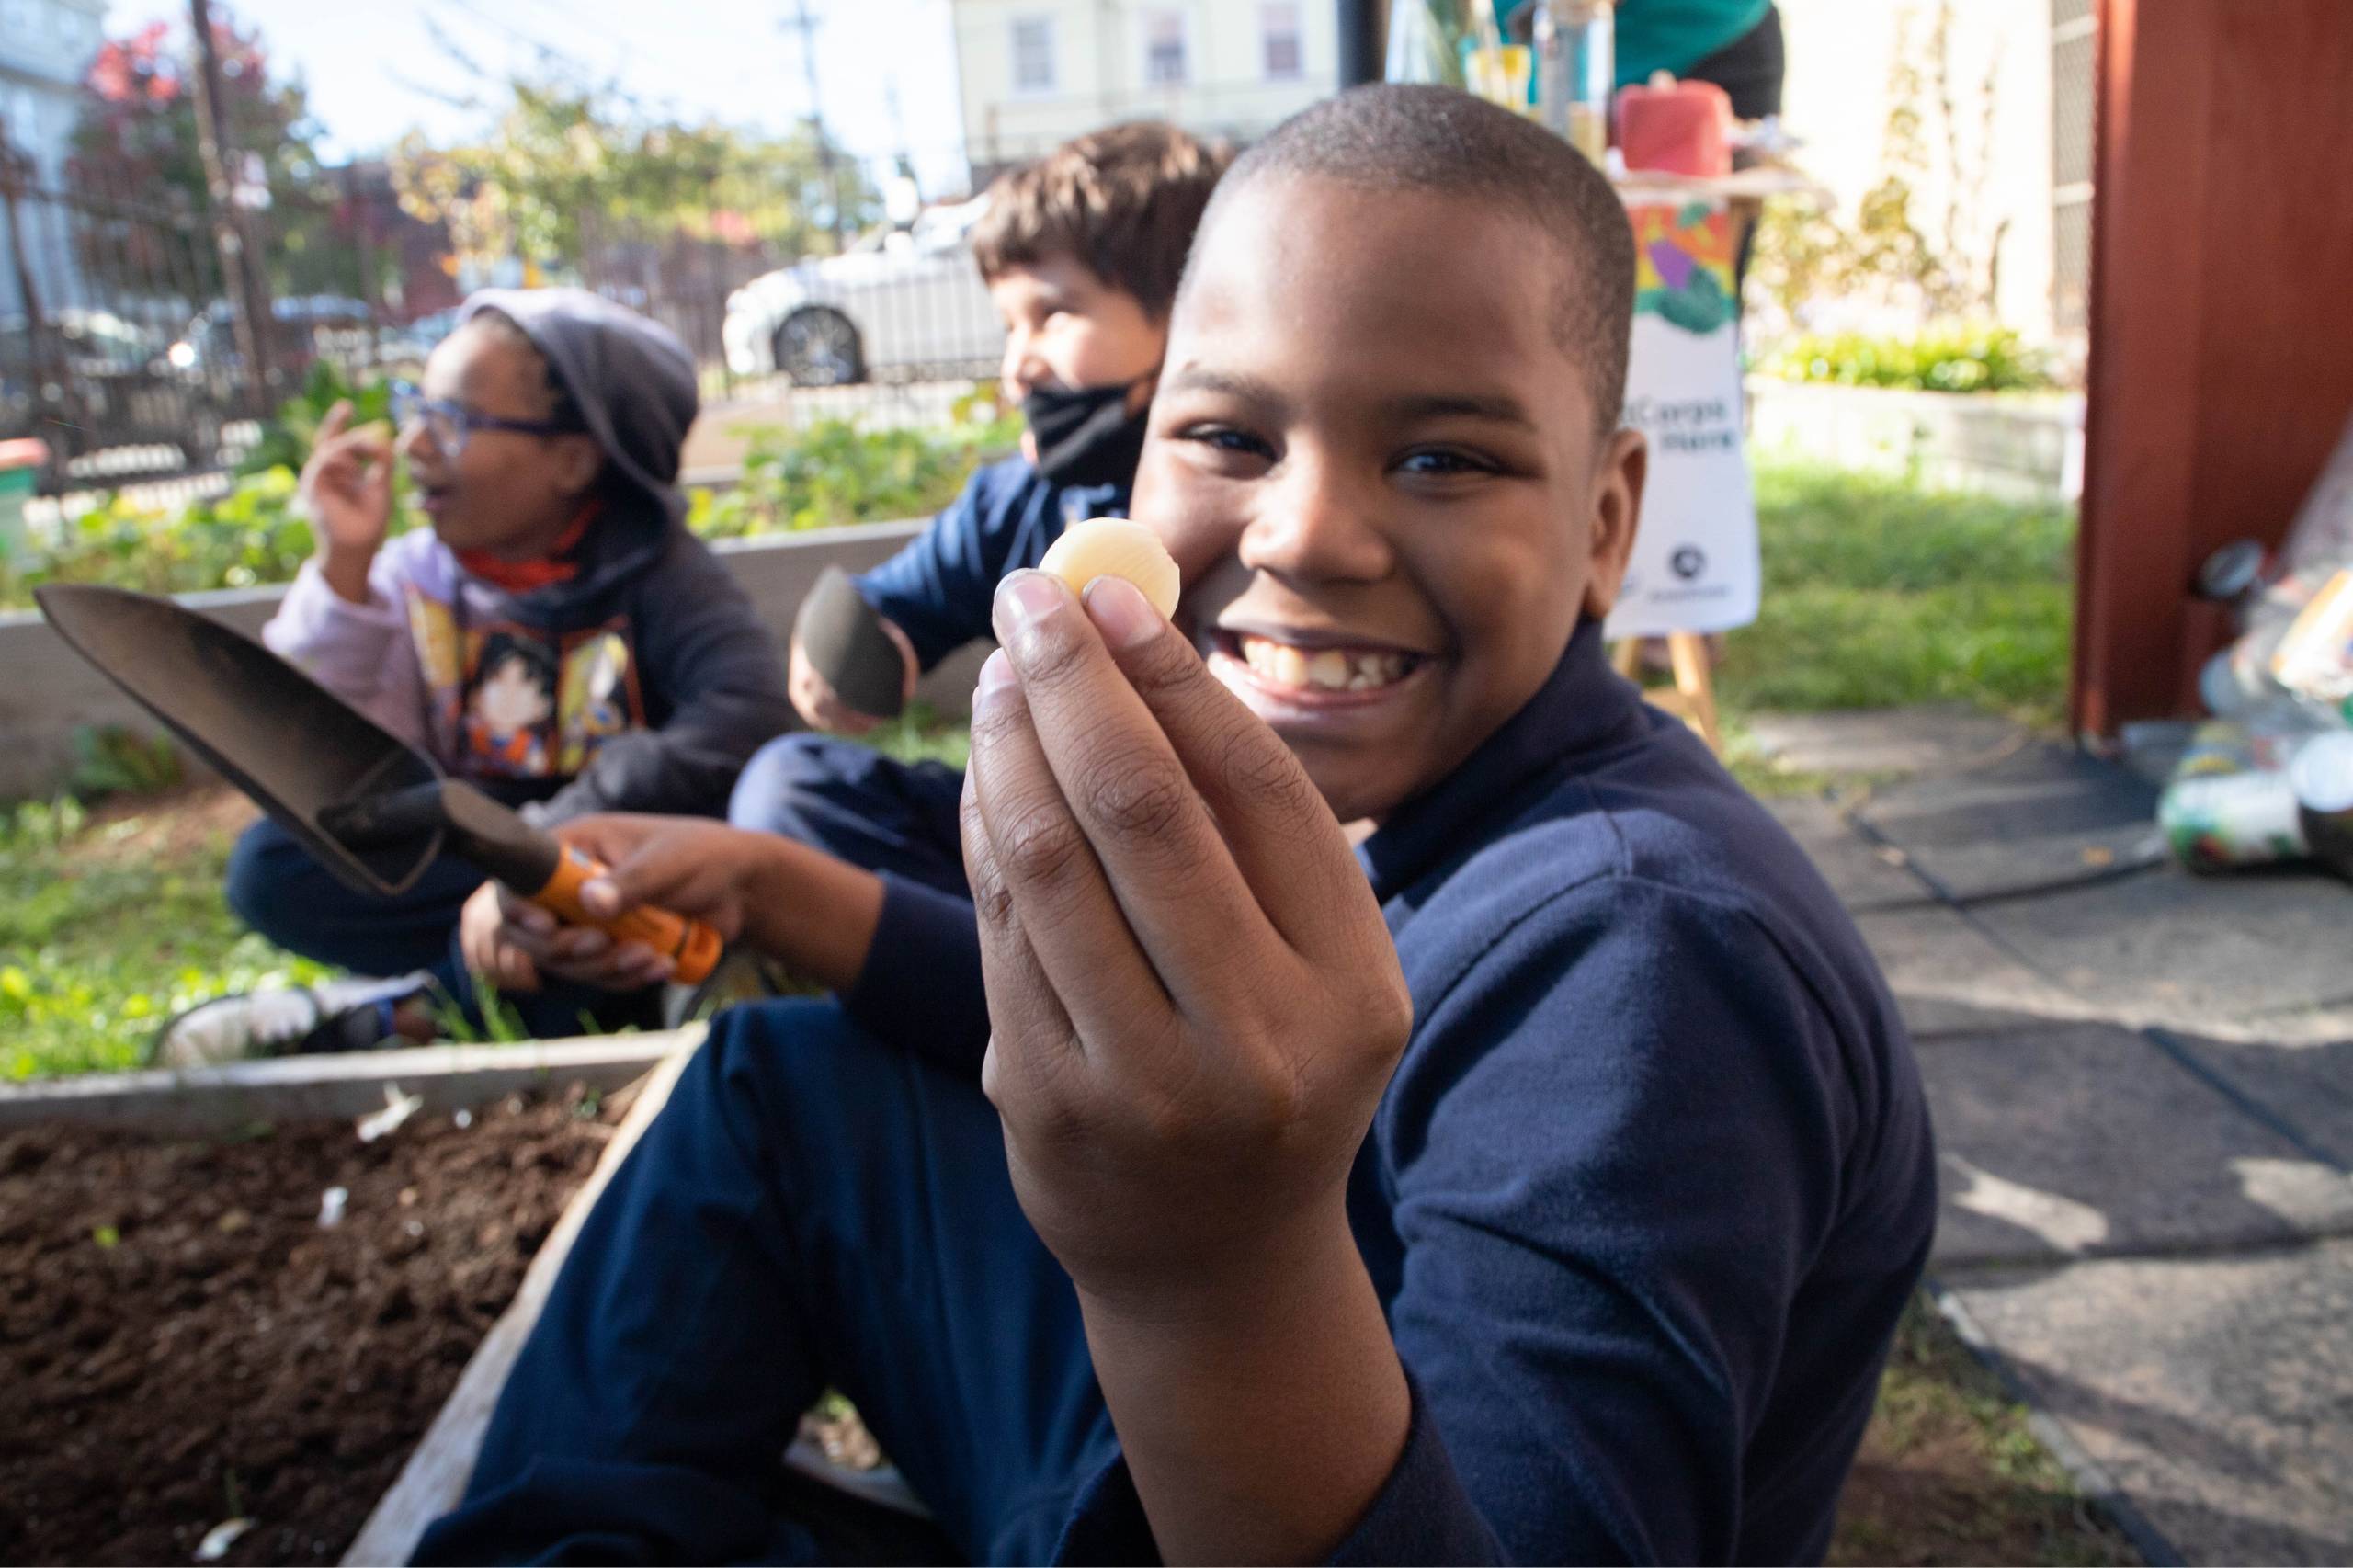 A smiling student wearing a navy blue shirt holds up a freshly-harvested garlic clove to the camera.